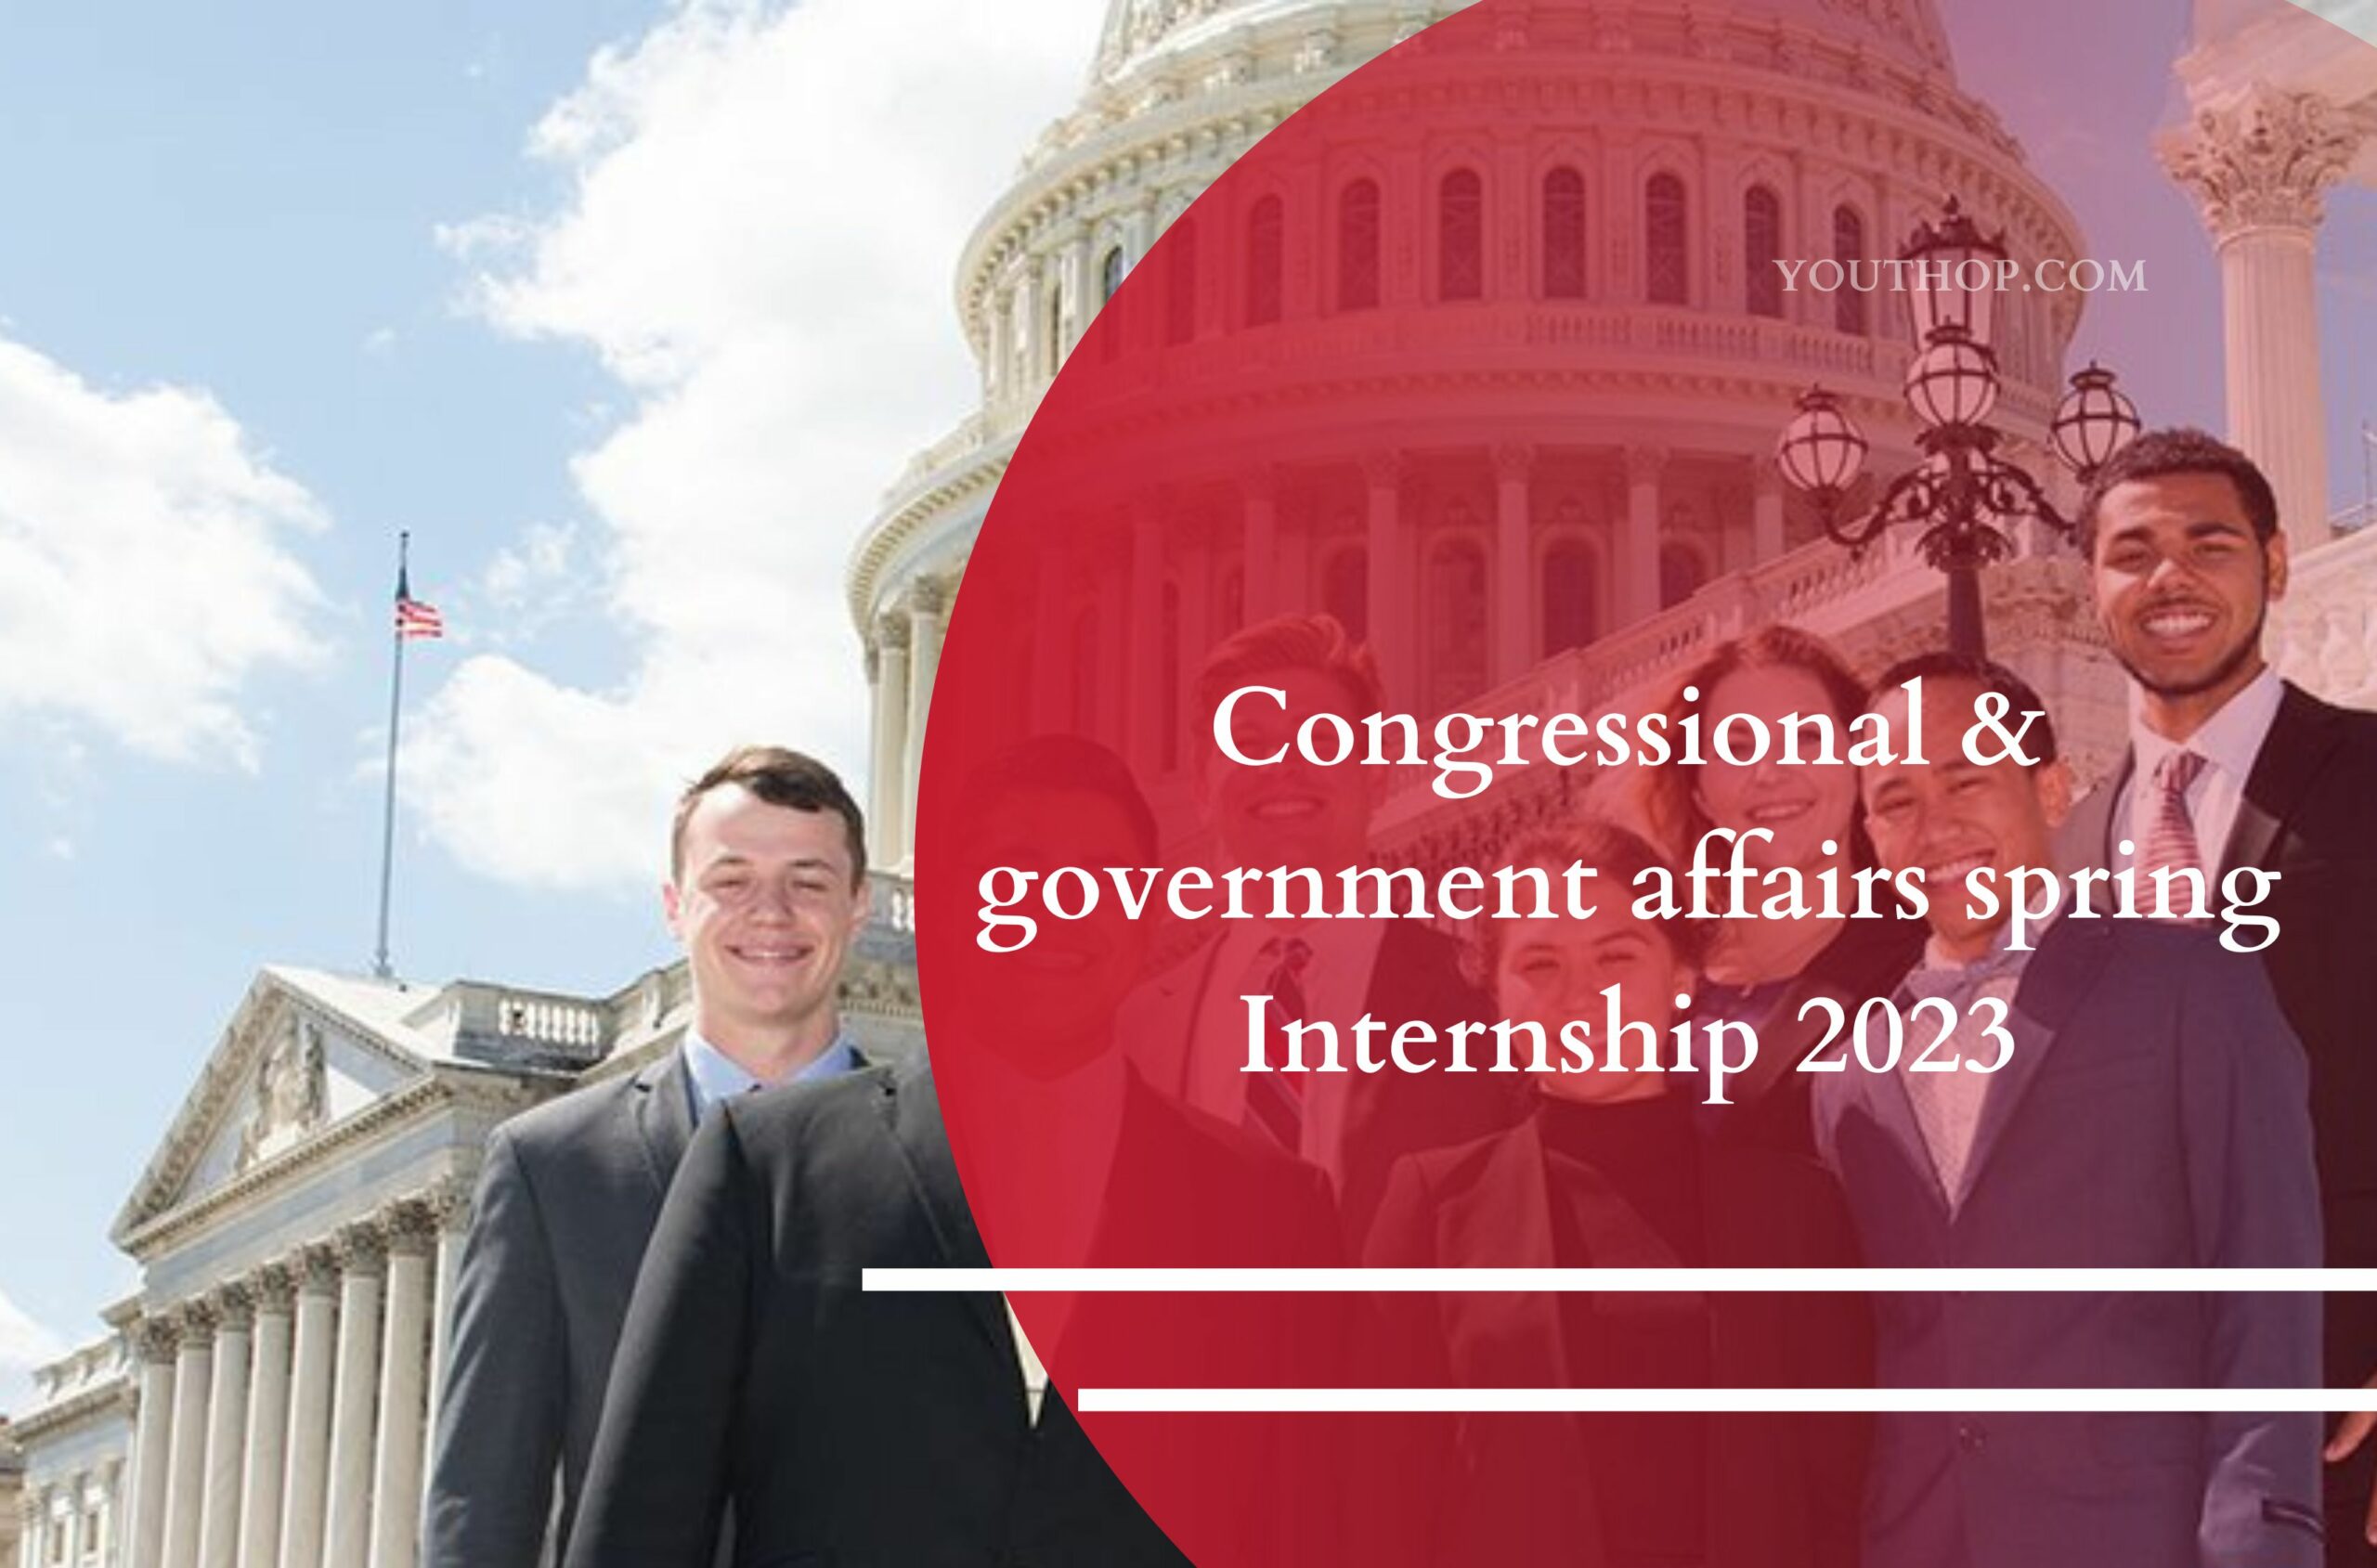 Congressional & government affairs spring 2023 - Youth Opportunities